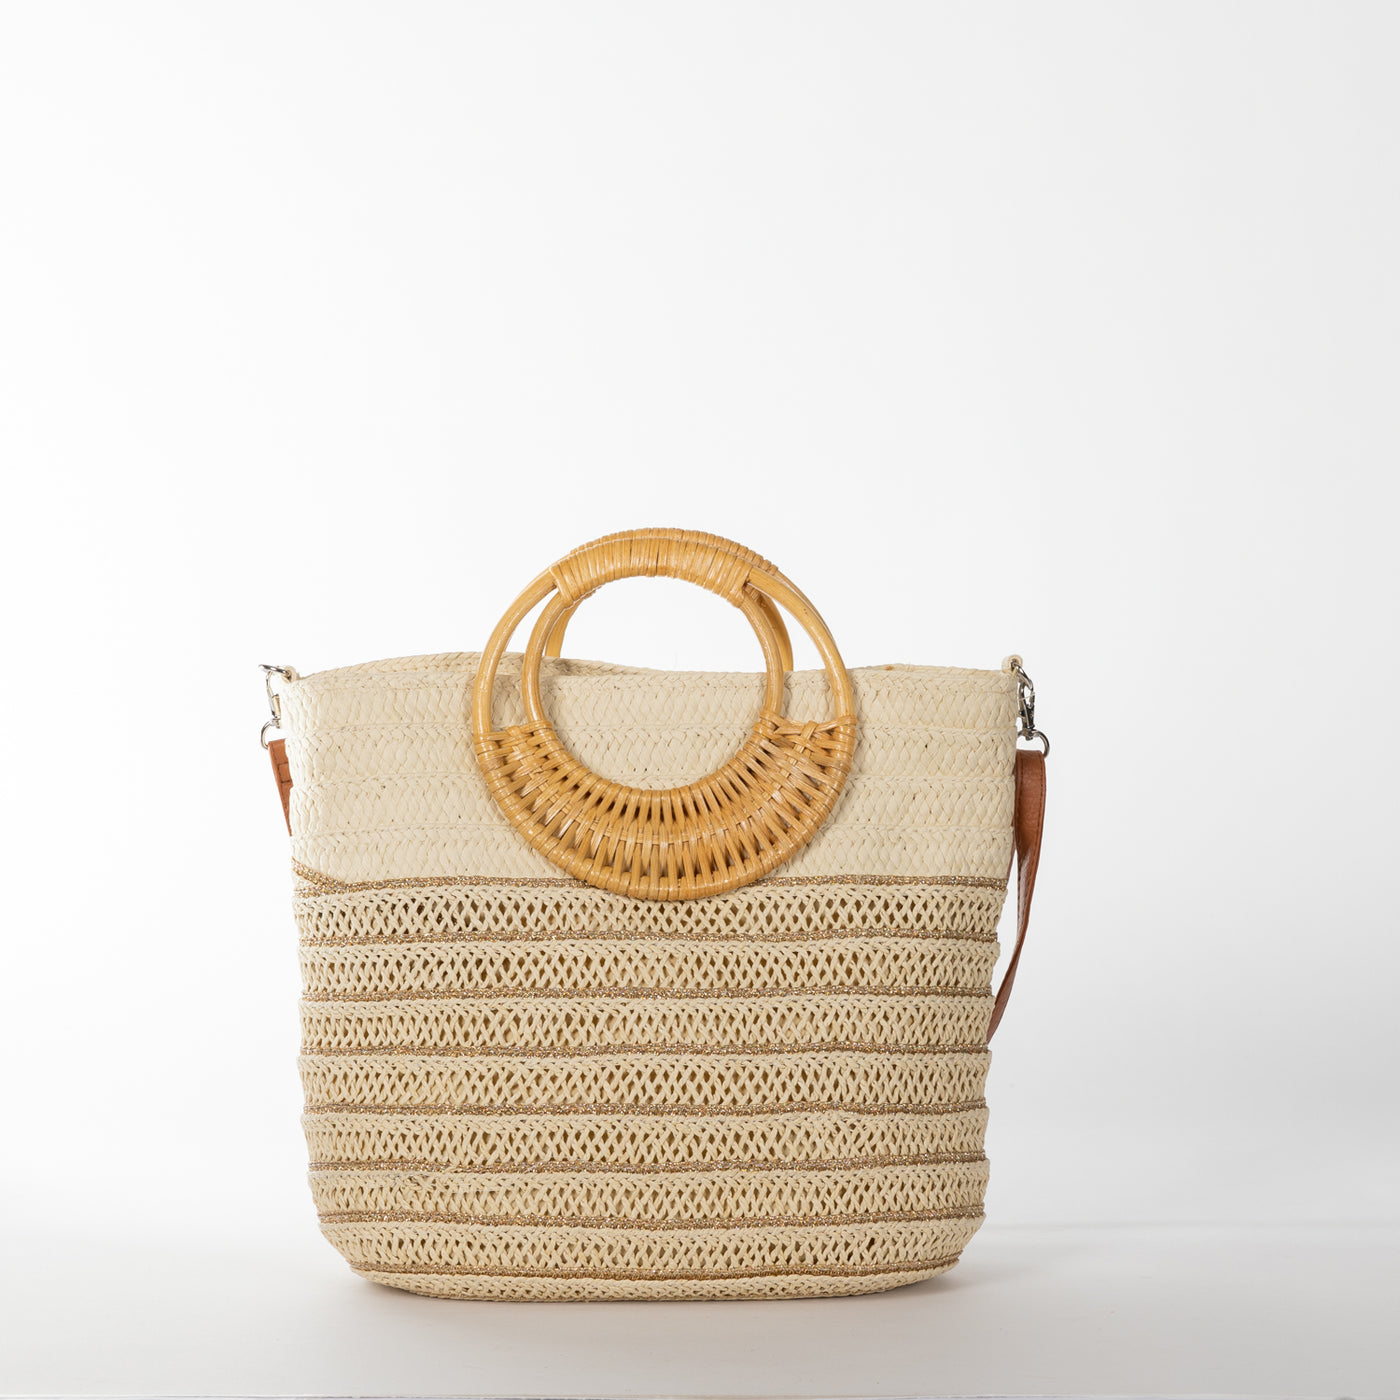 Rattan tote Bags and matching Hats